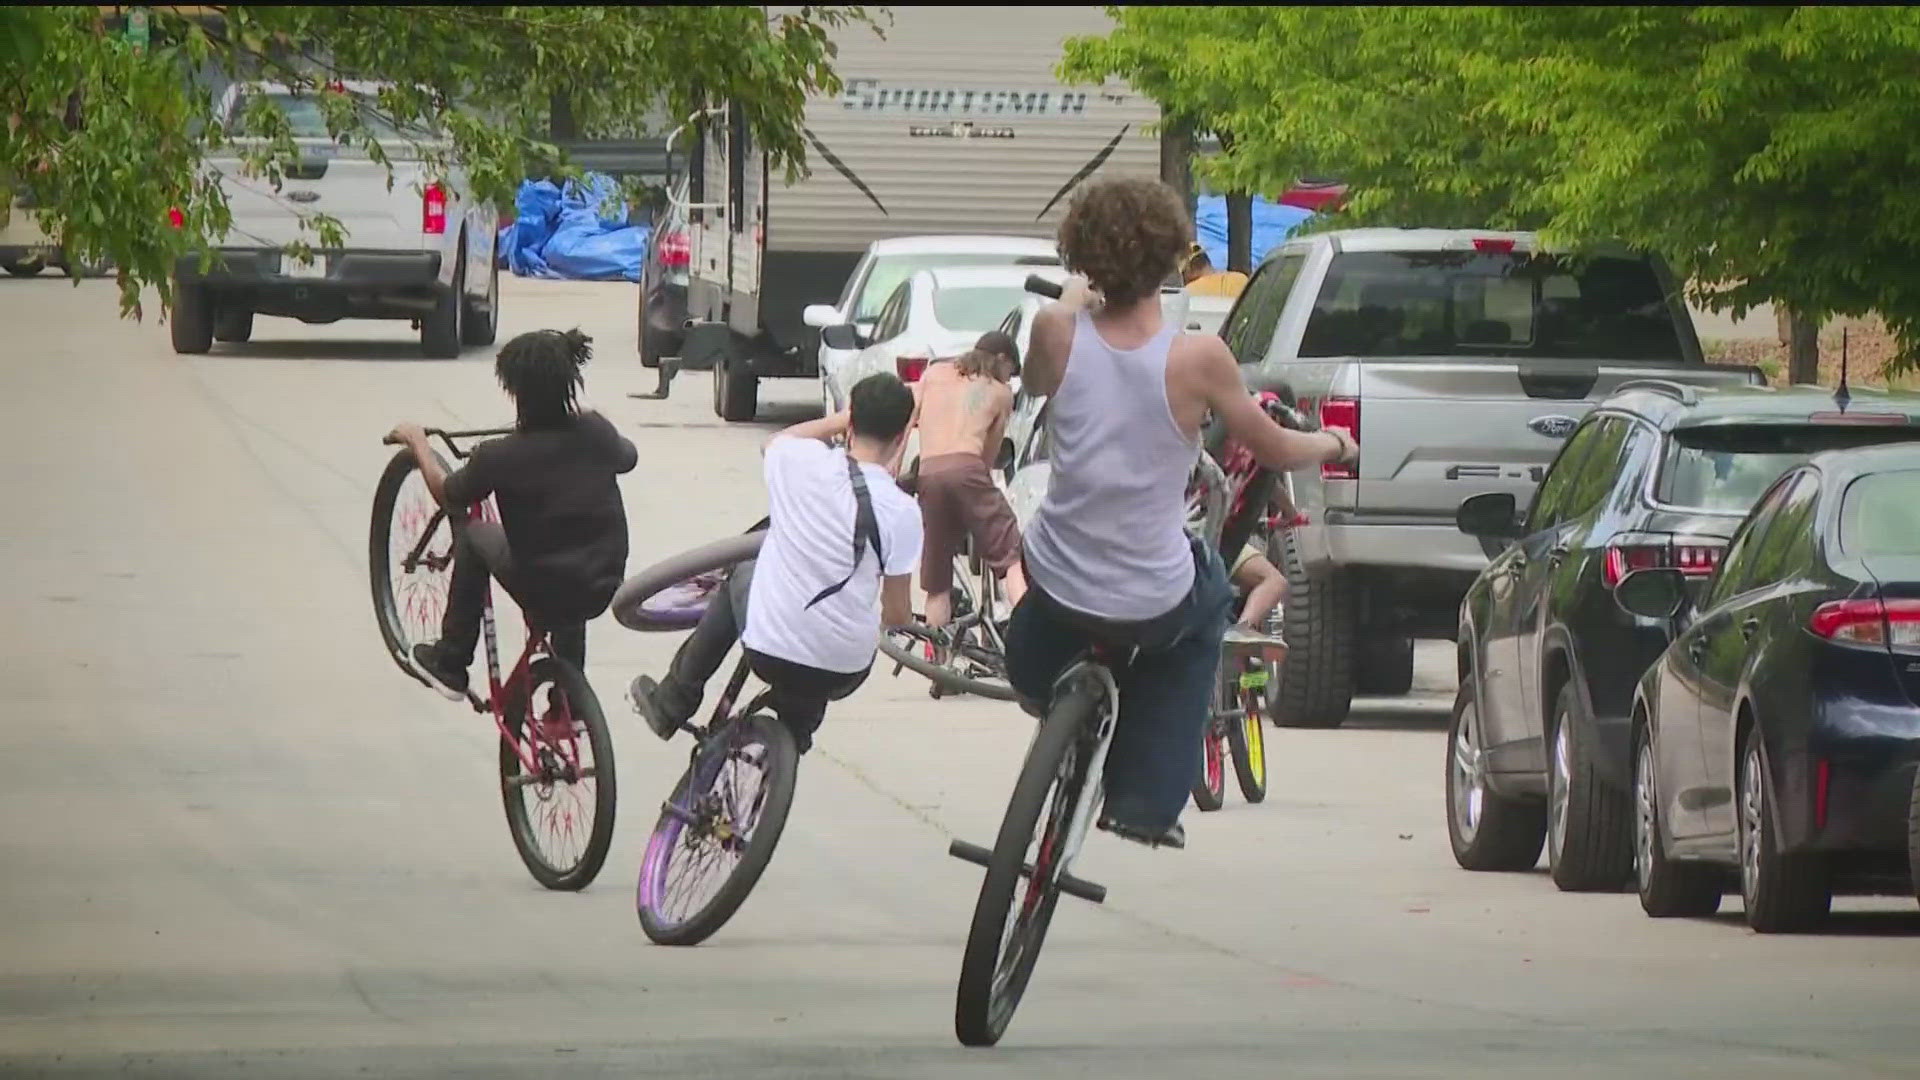 A group of about 80 to 100 people rode their bikes through the Old 4th Ward Skate Park to Northside Drive Sunday.